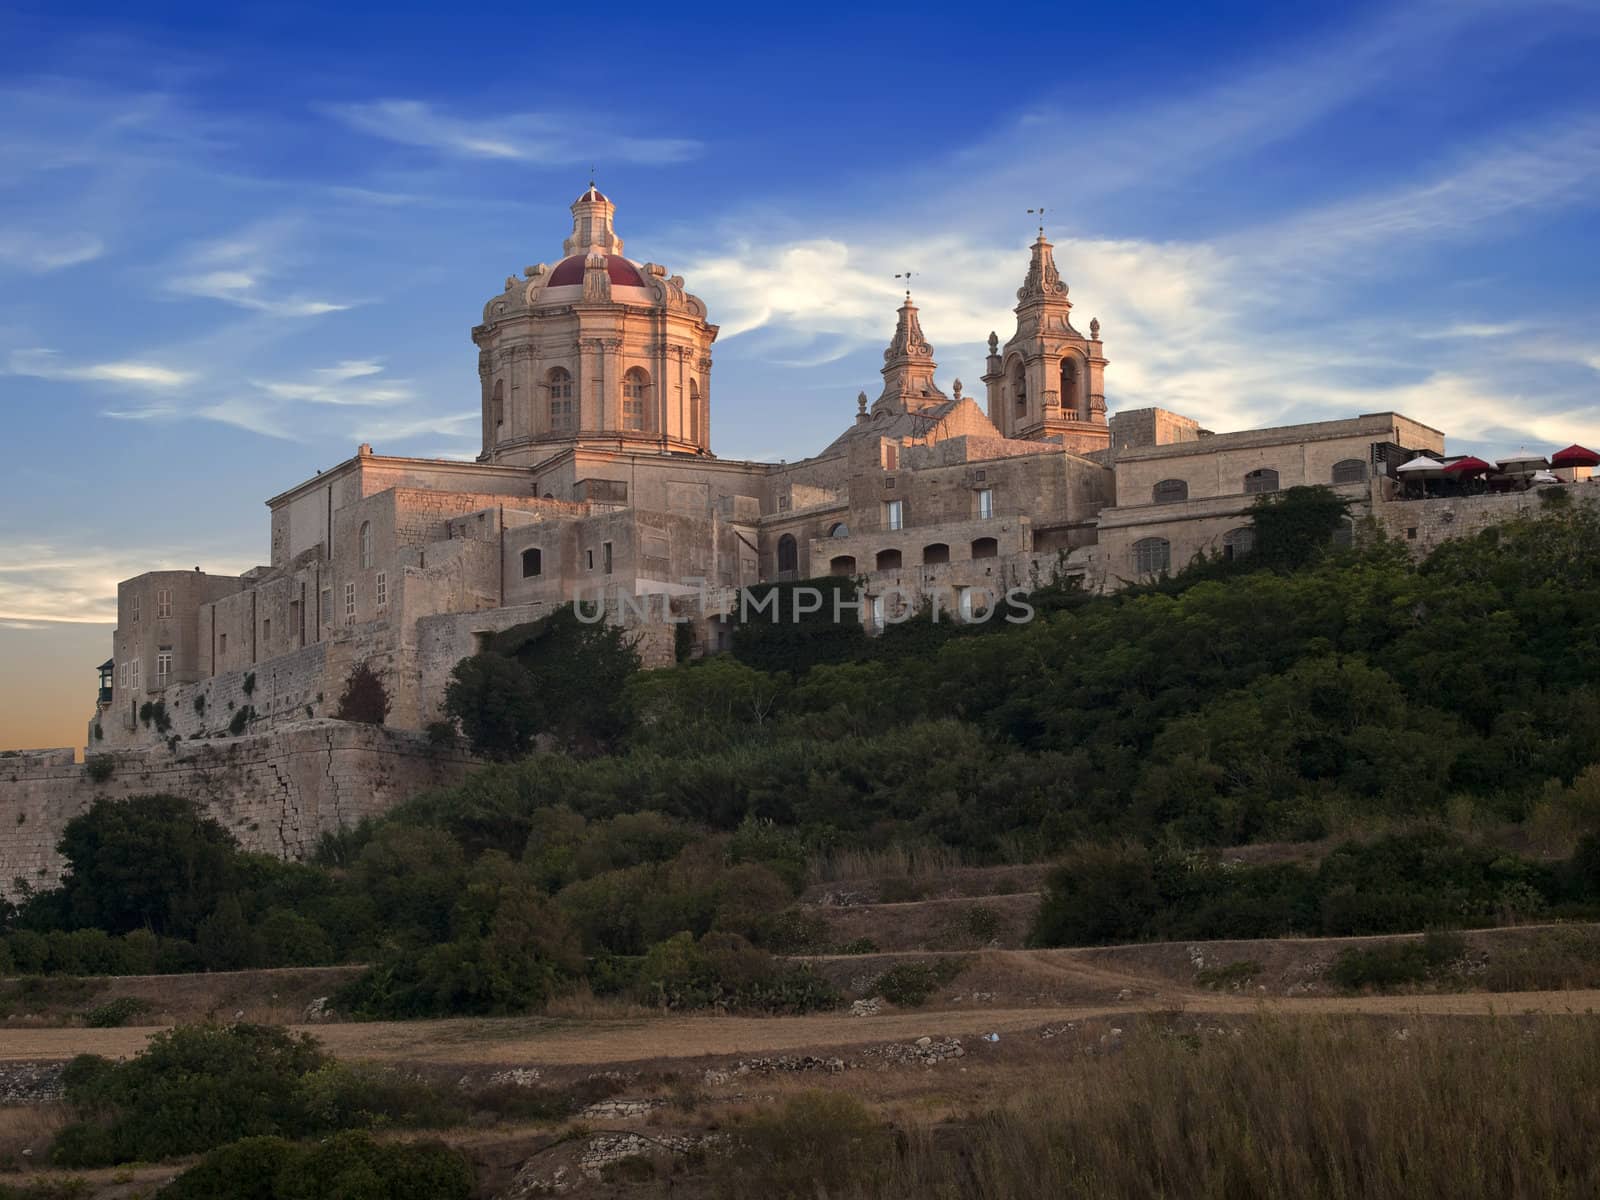 The beautiful city of Mdina gently kissed by the last rays of the sun on a summer's day